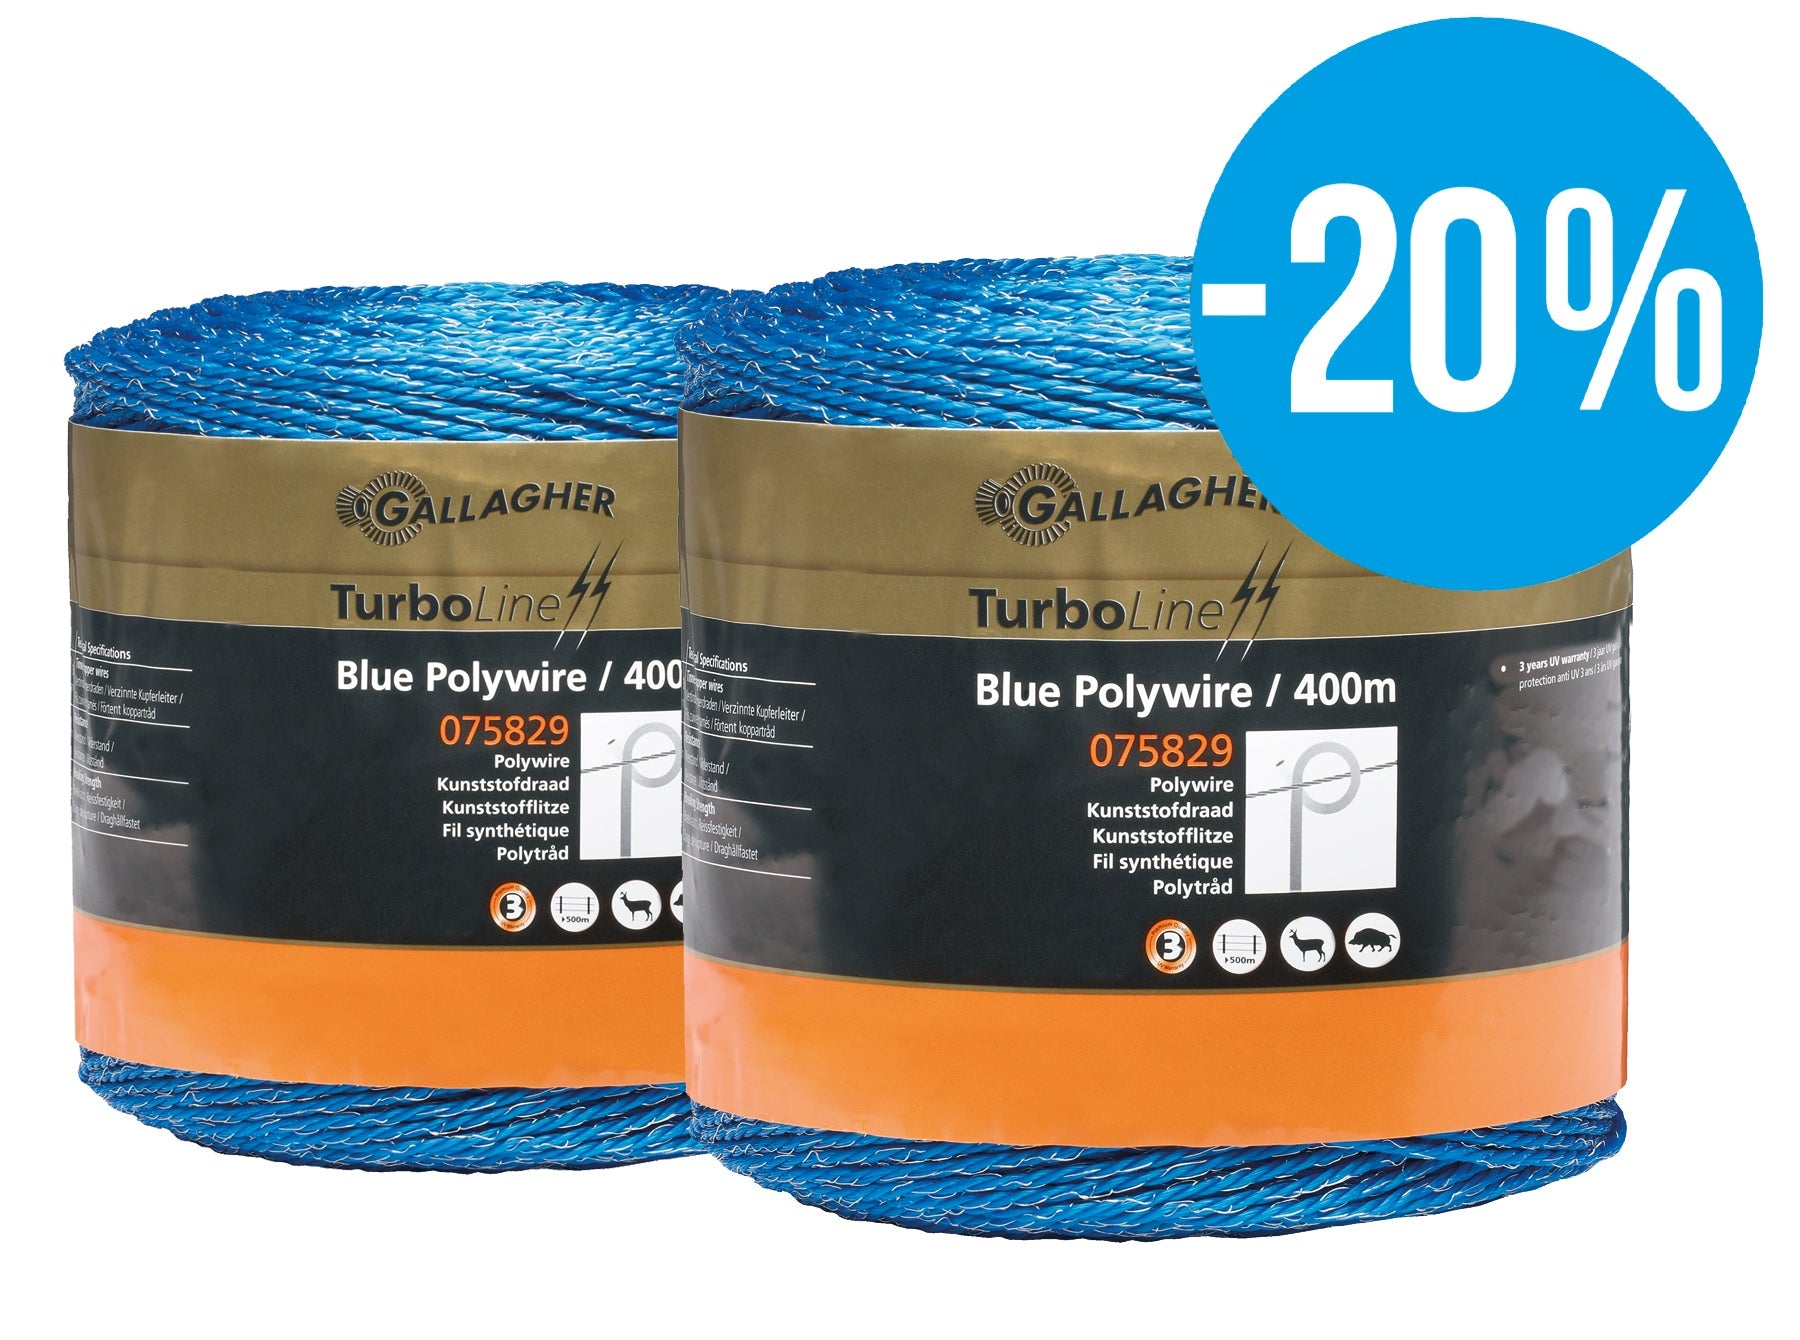 Duopack TurboLine Blue Polywire 2x400m